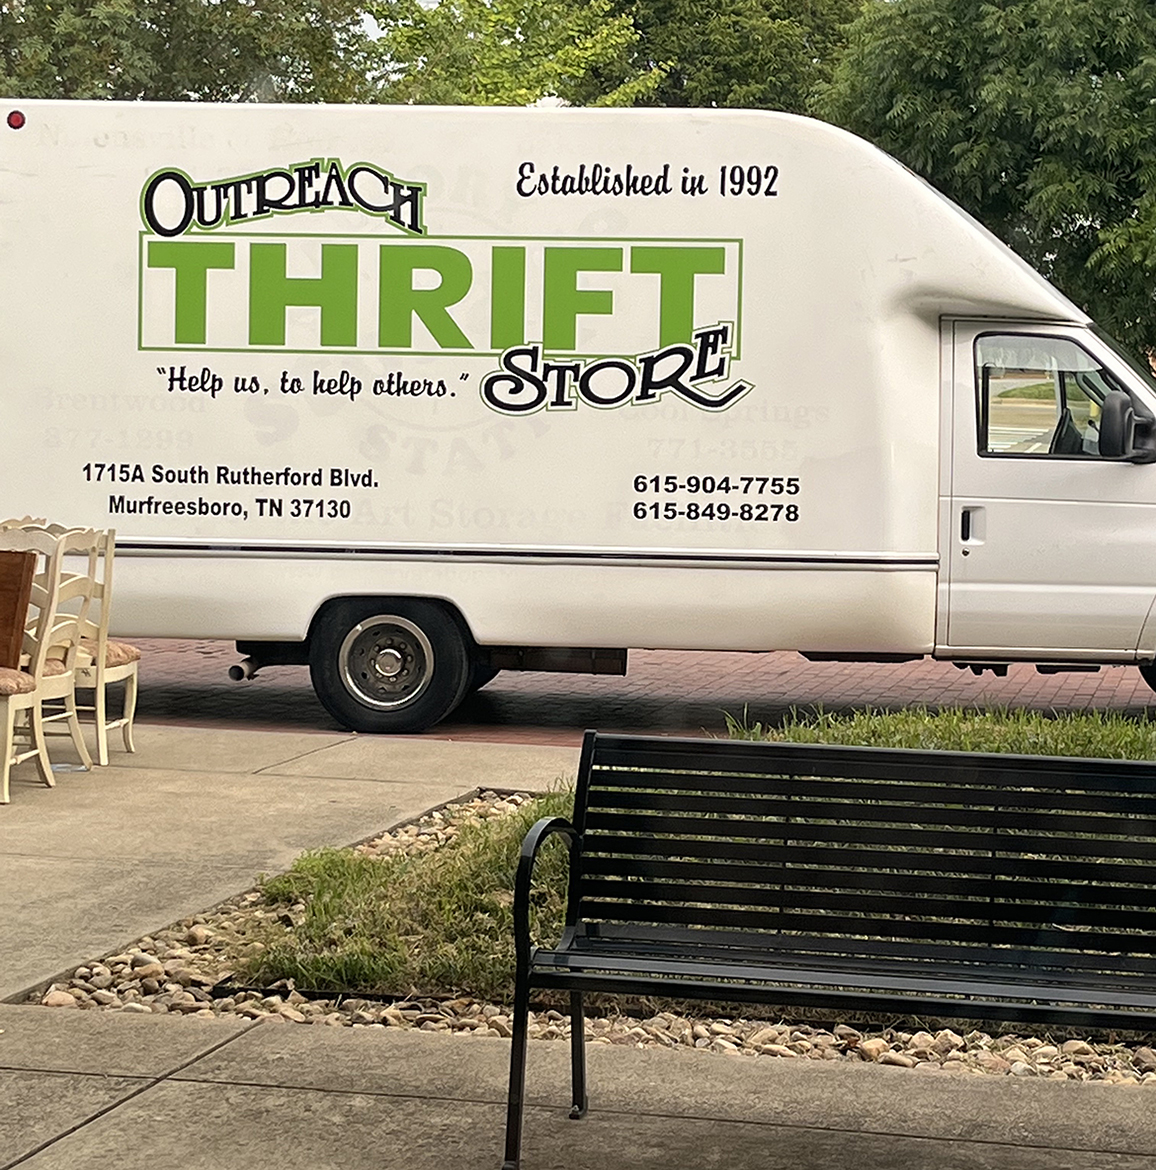 Once 200 MTSU students claimed any of the free items they wanted and the inaugural Free Cycle event ended, the remaining items were donated to the Outreach Thrift Store in Murfreesboro, Tenn., to help the local homeless population. (Submitted photo)